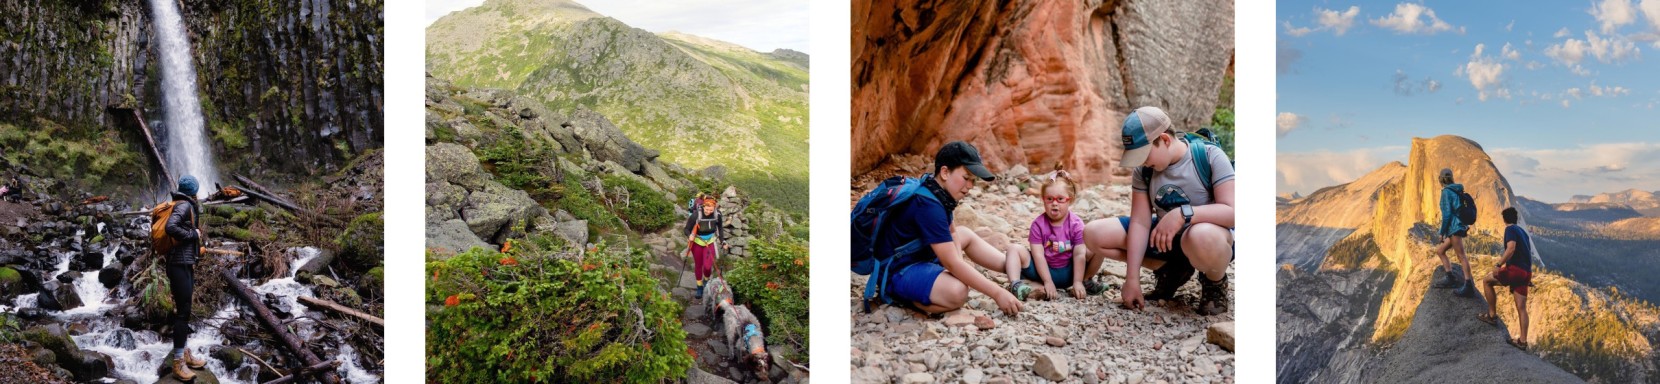 4 images of hikers in various outdoor settings.